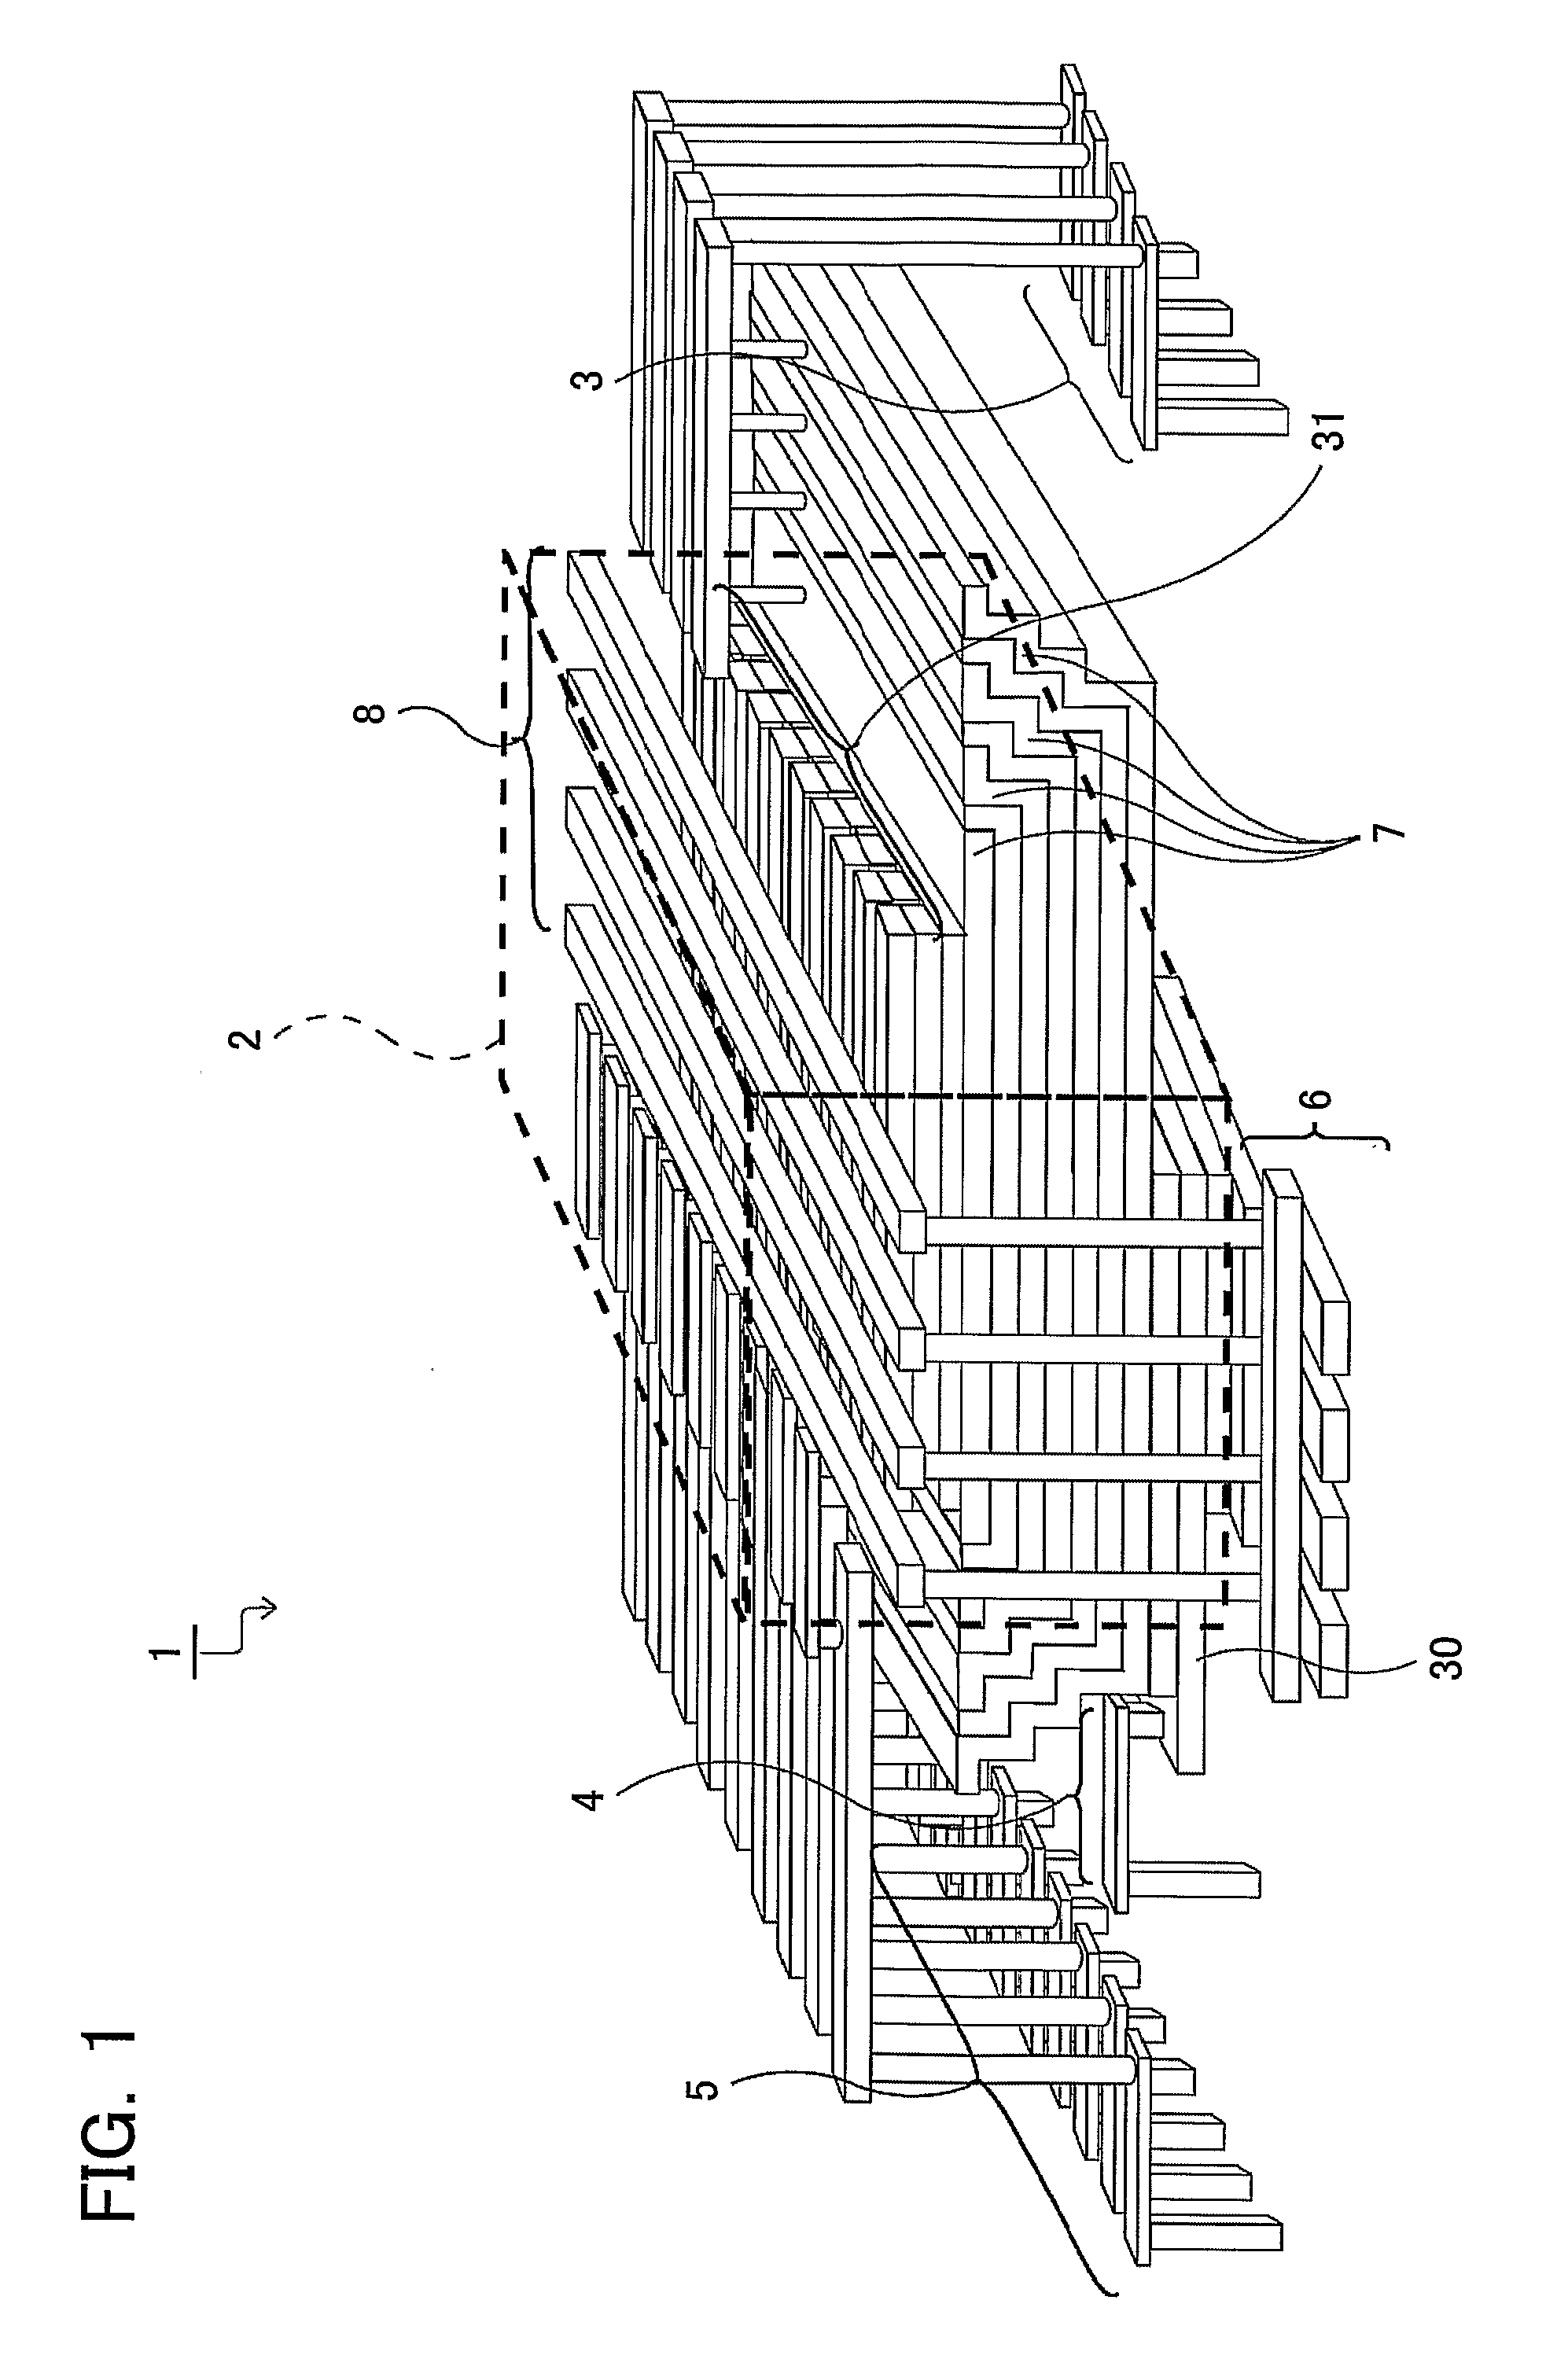 Non-volatile semiconductor memory device and method of making the same